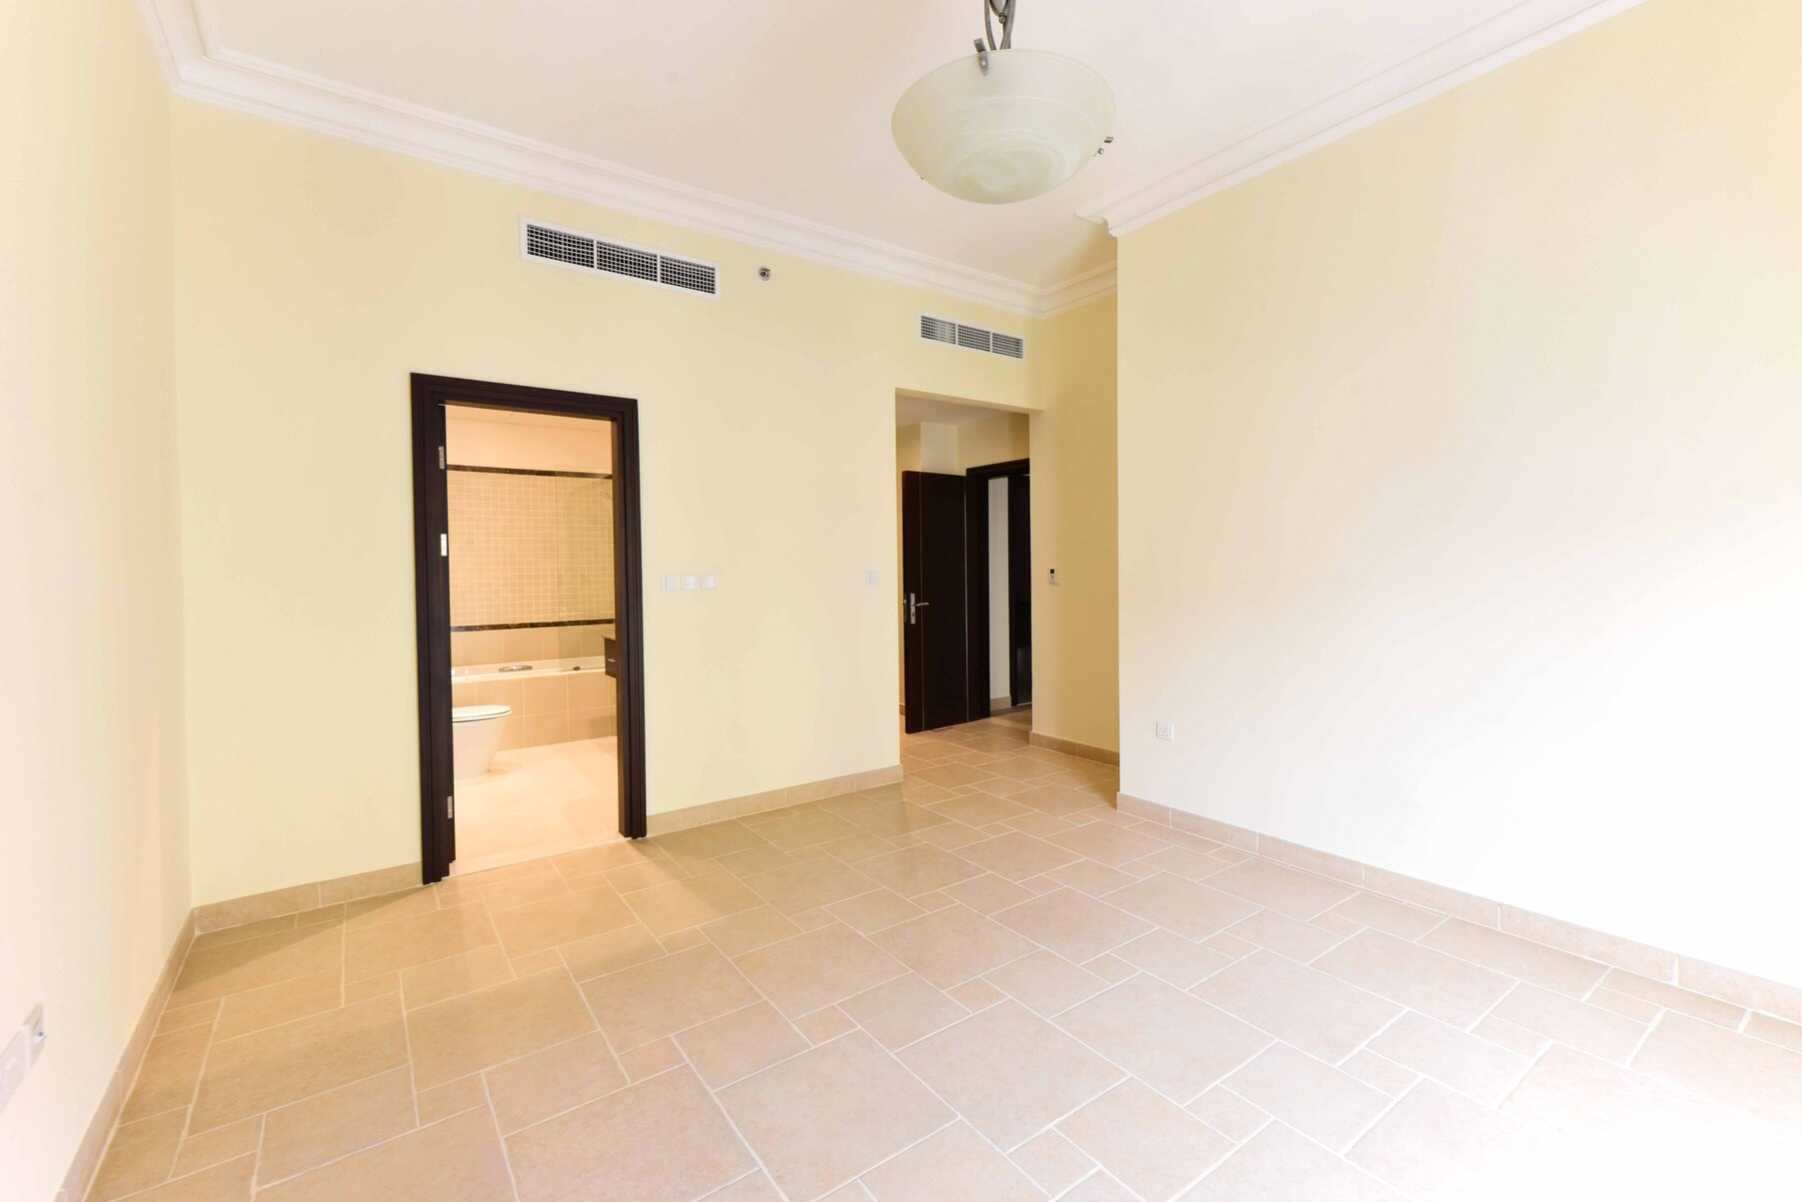 25 Spaces Real Estate - Qanat Quartier - Properties for Sale - 13th October 2021 ref6500 (10)